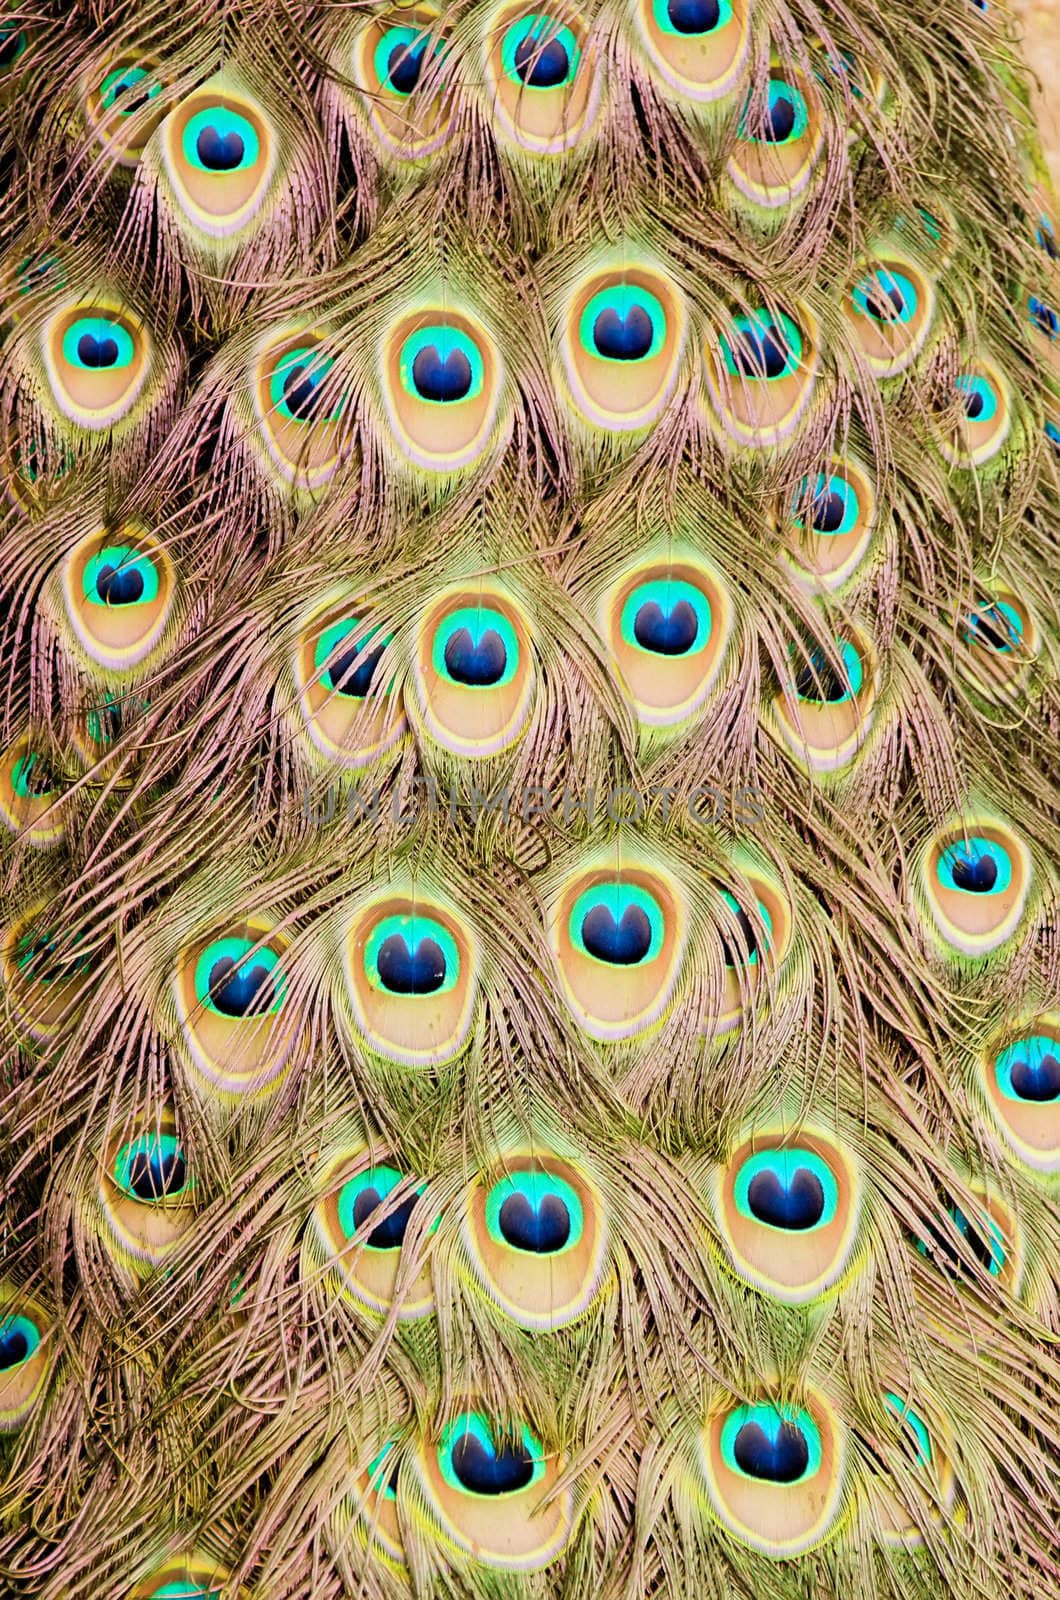 peacock feathers by njaj